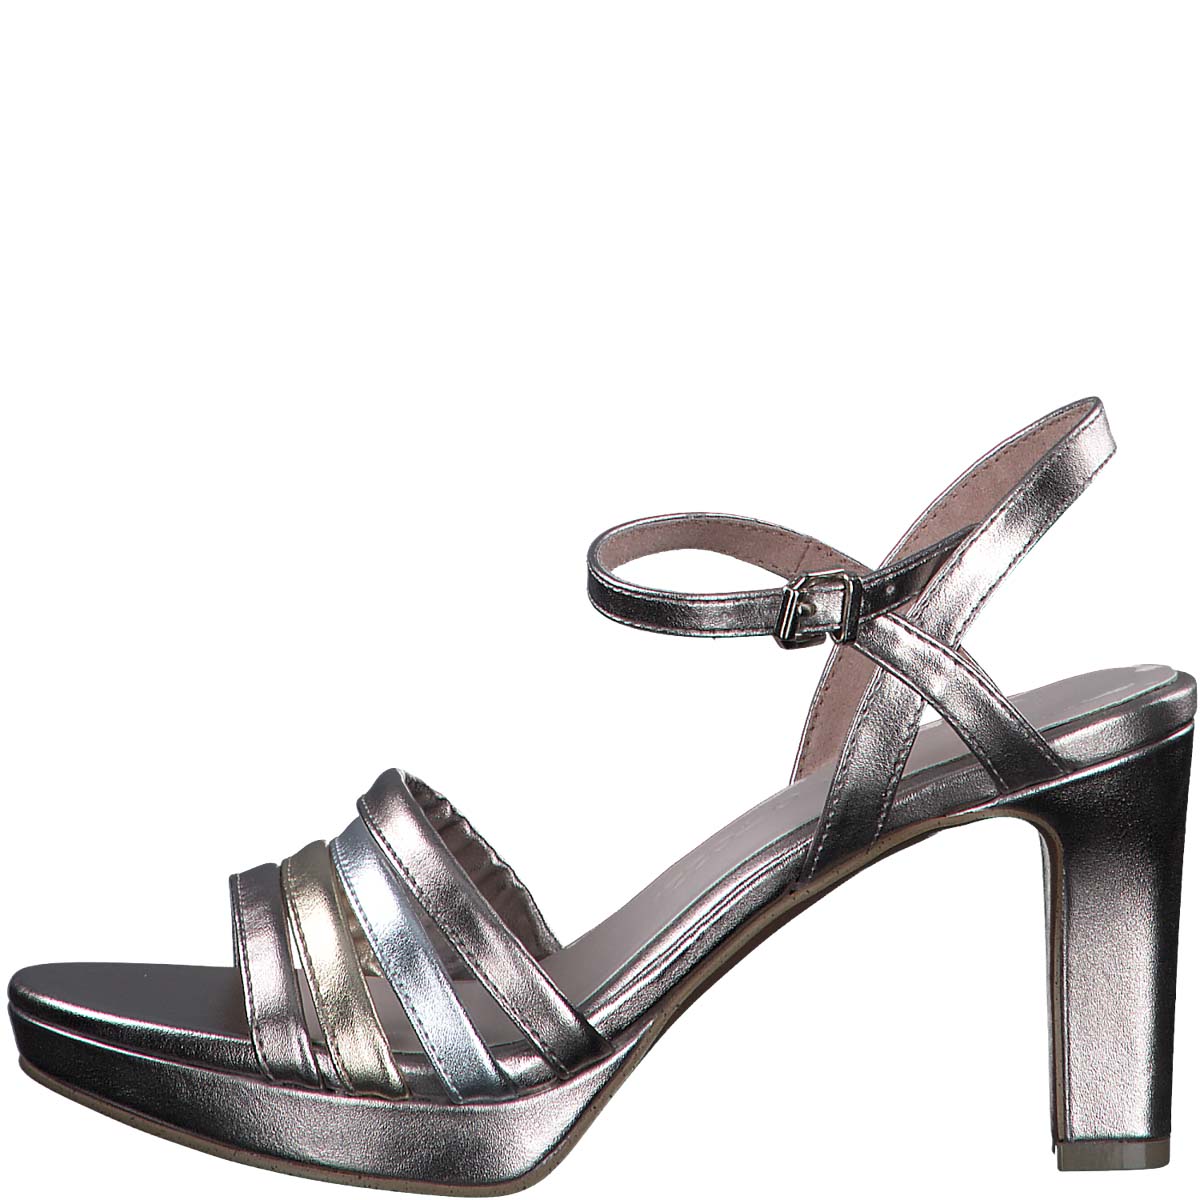 Dare to Shine: Make a Statement with the Metallic Accented Platform Sandal